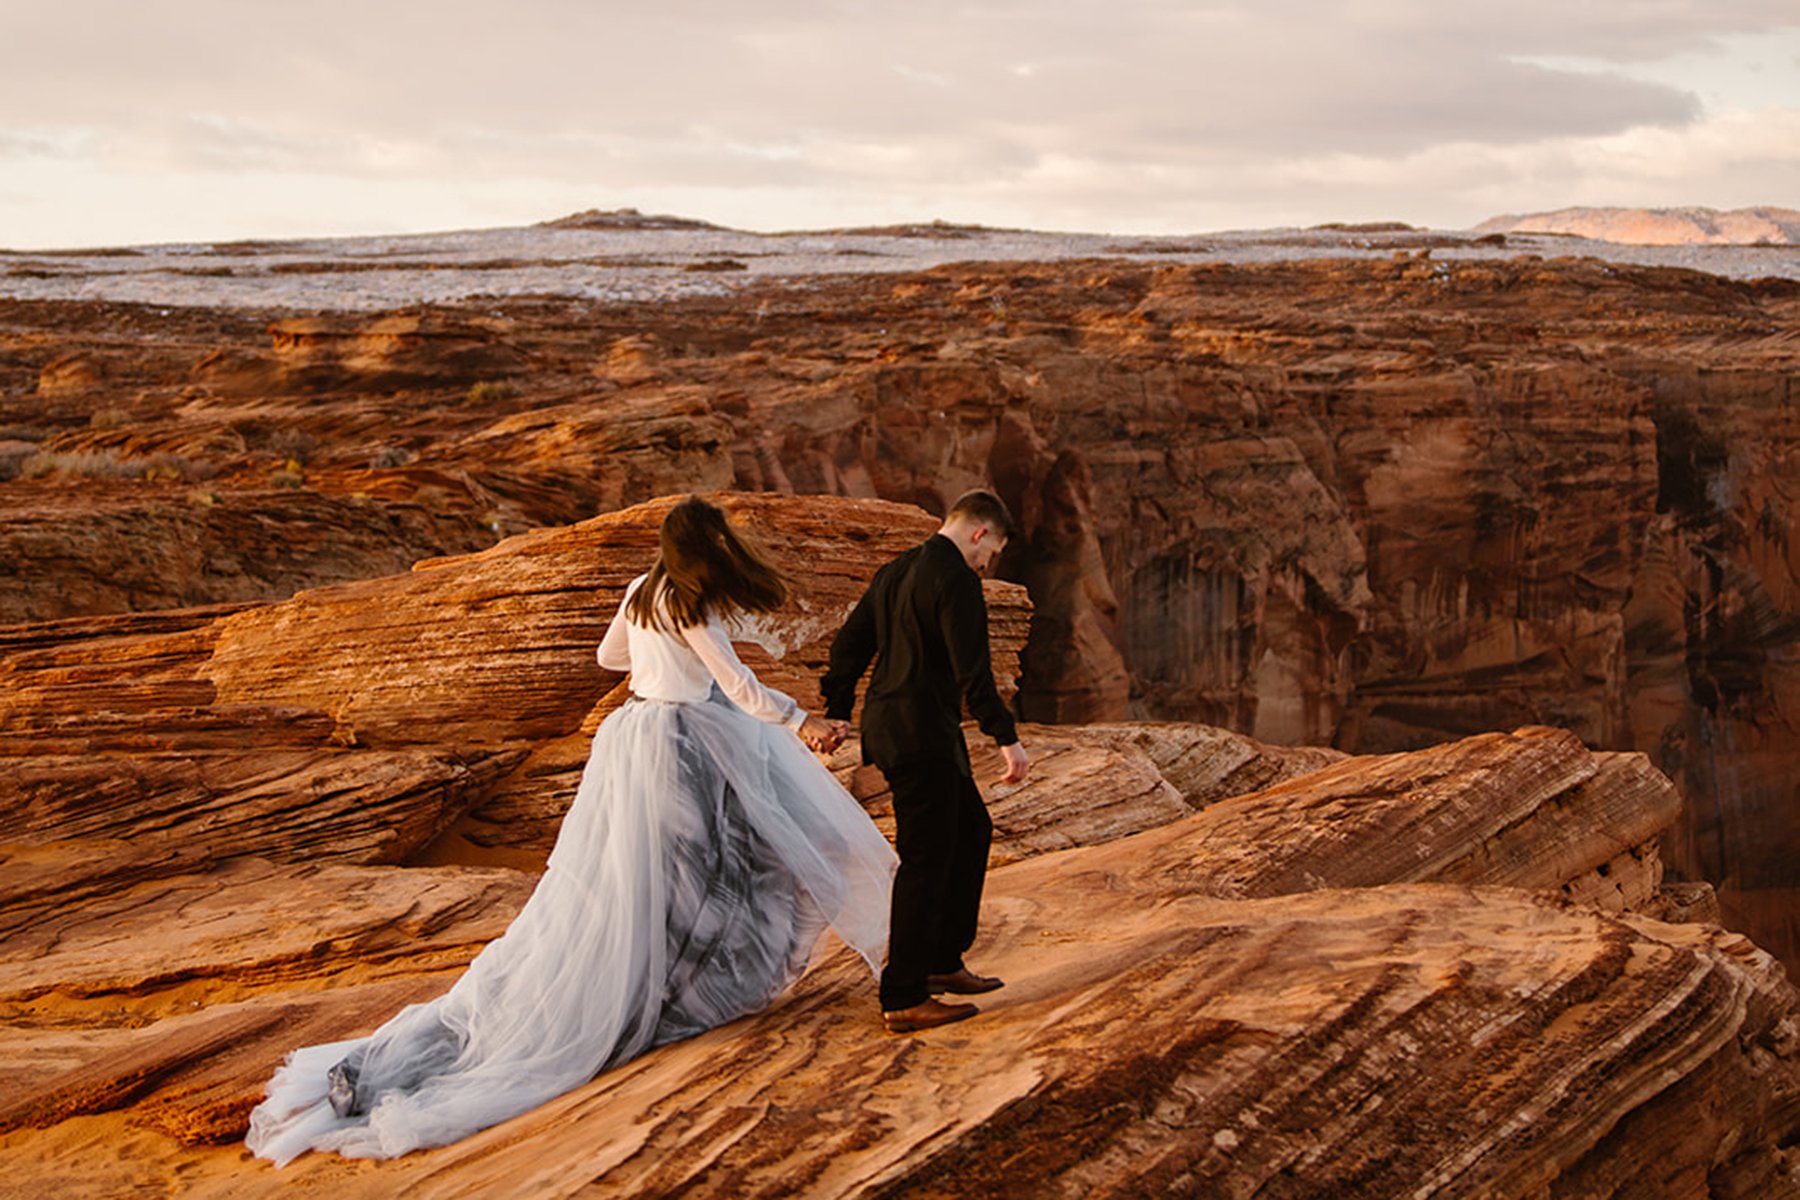 Skye skirt, a gorgeous painted blue tulle skirt for rent for engagement photoshoots